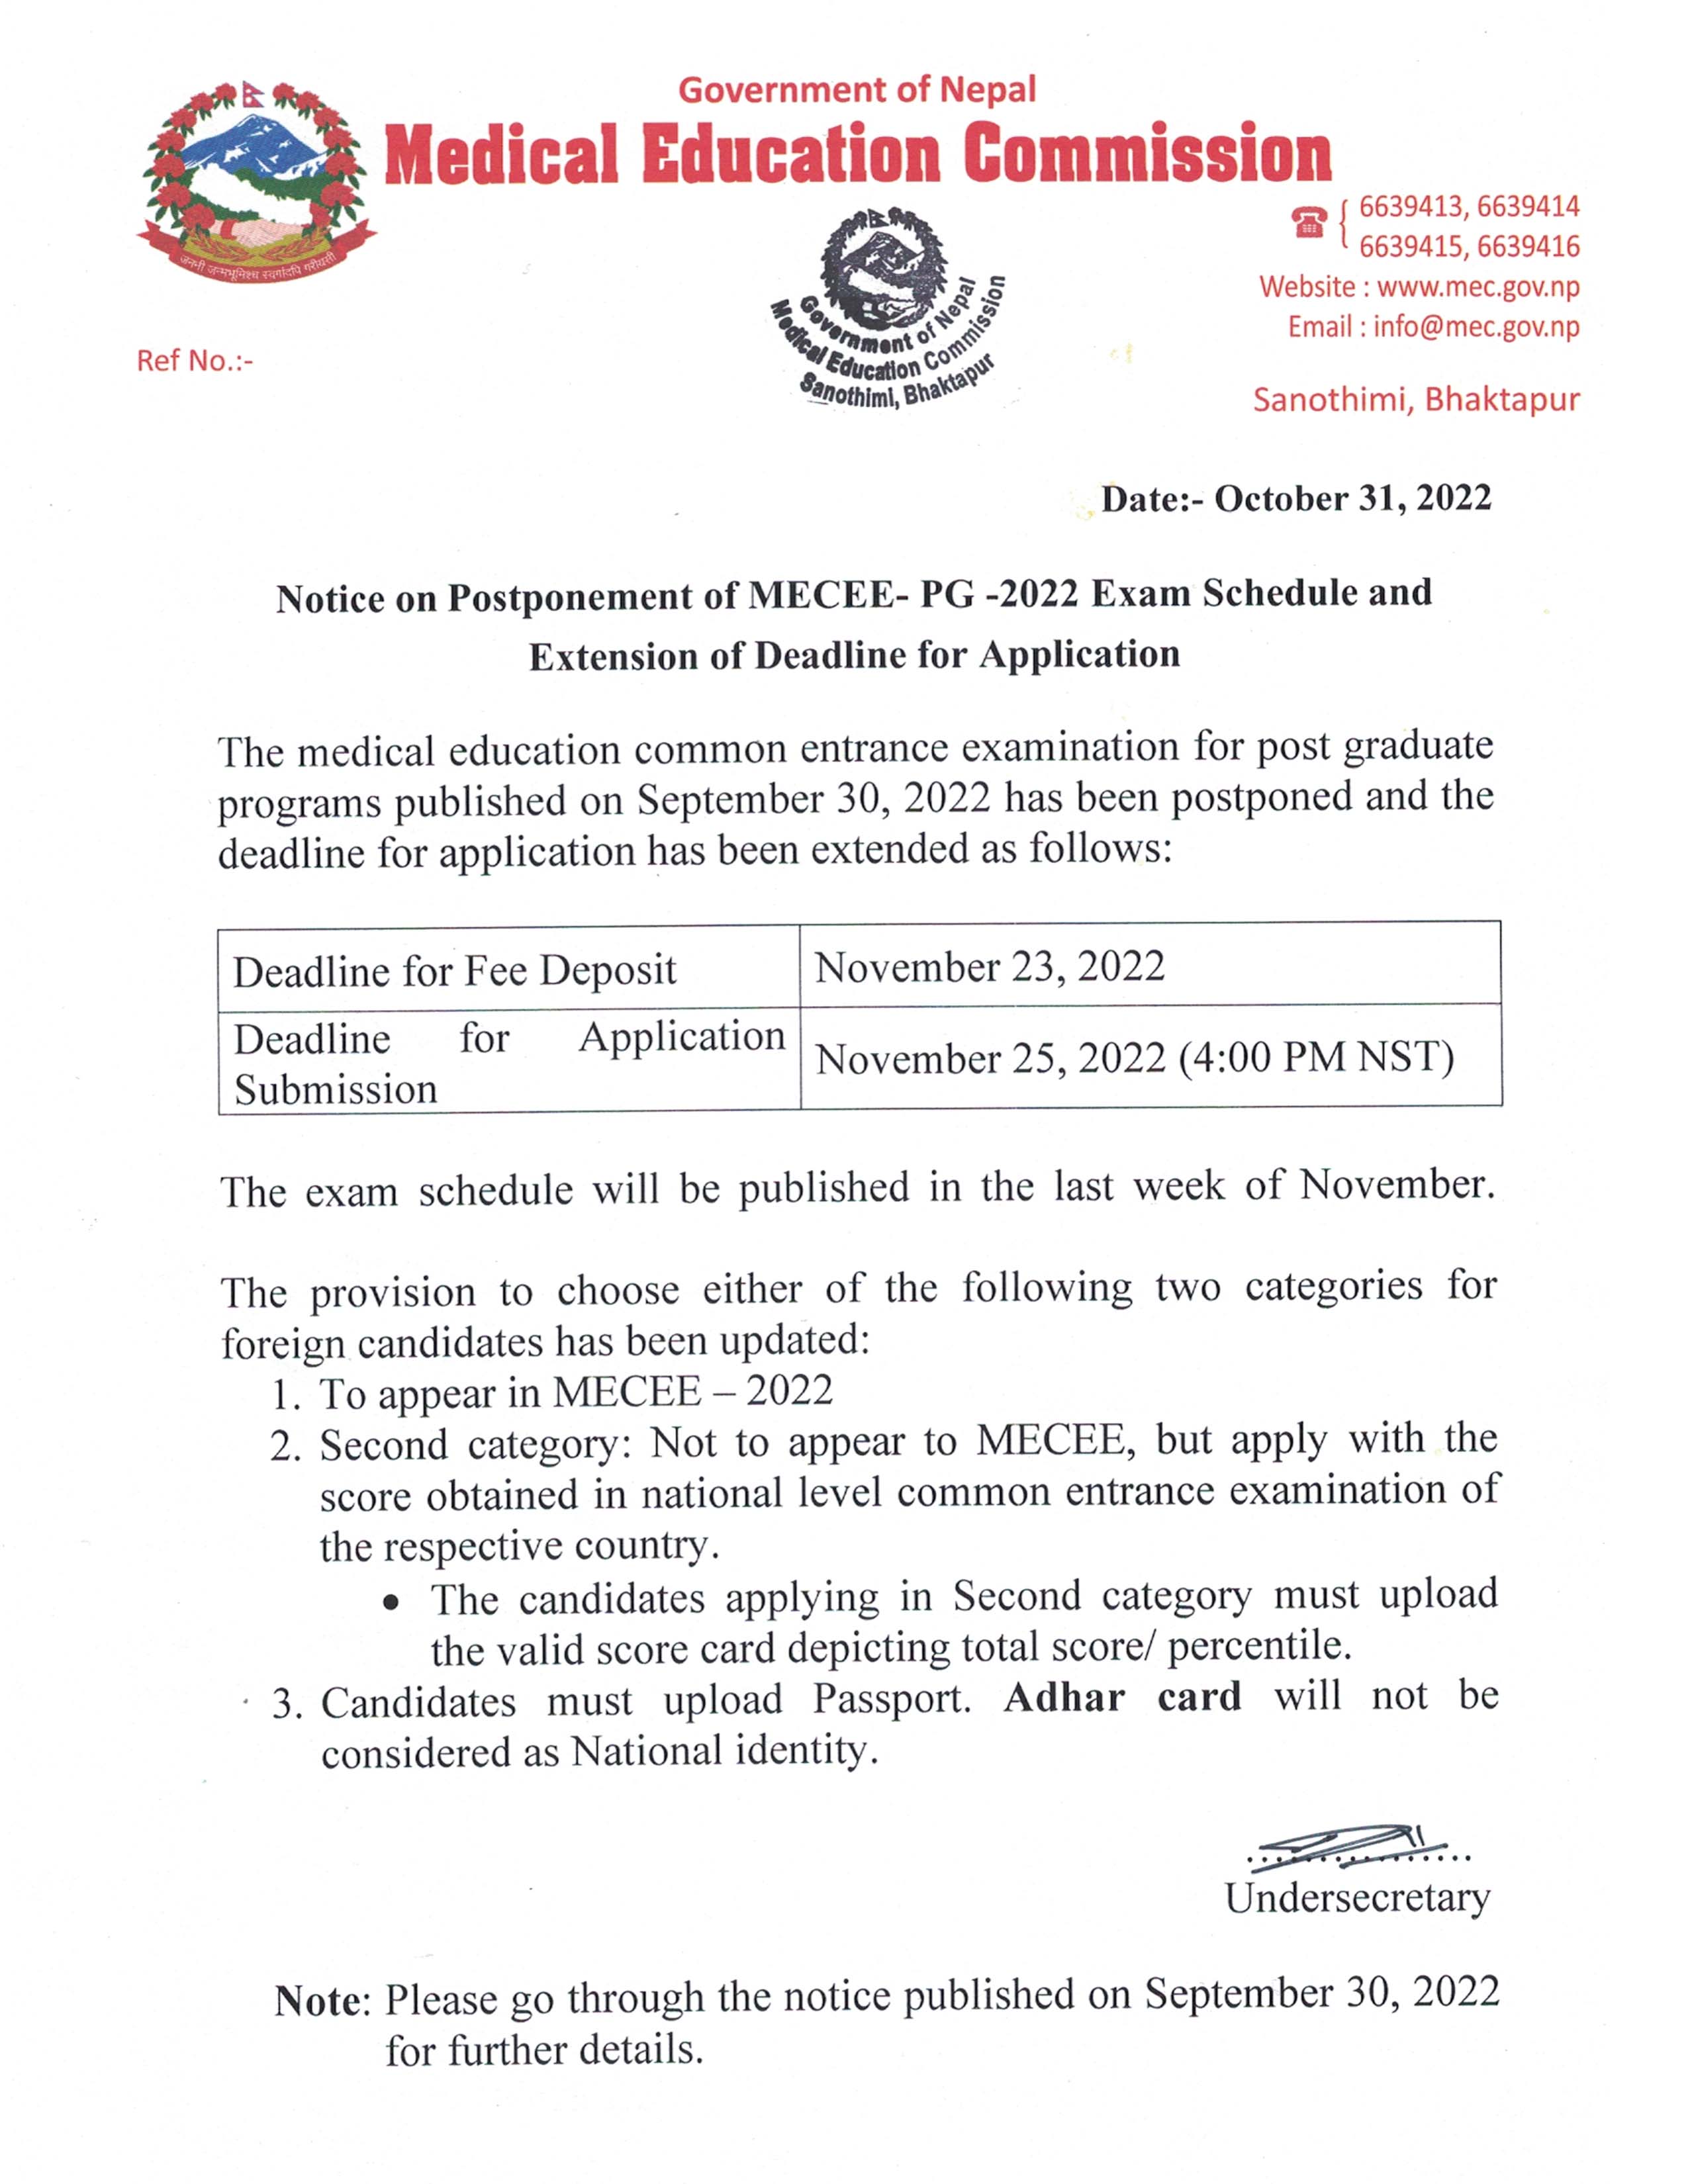 Notice on Postponement of MECEE-PG Exam Shedule and Extension of Deadline for Application